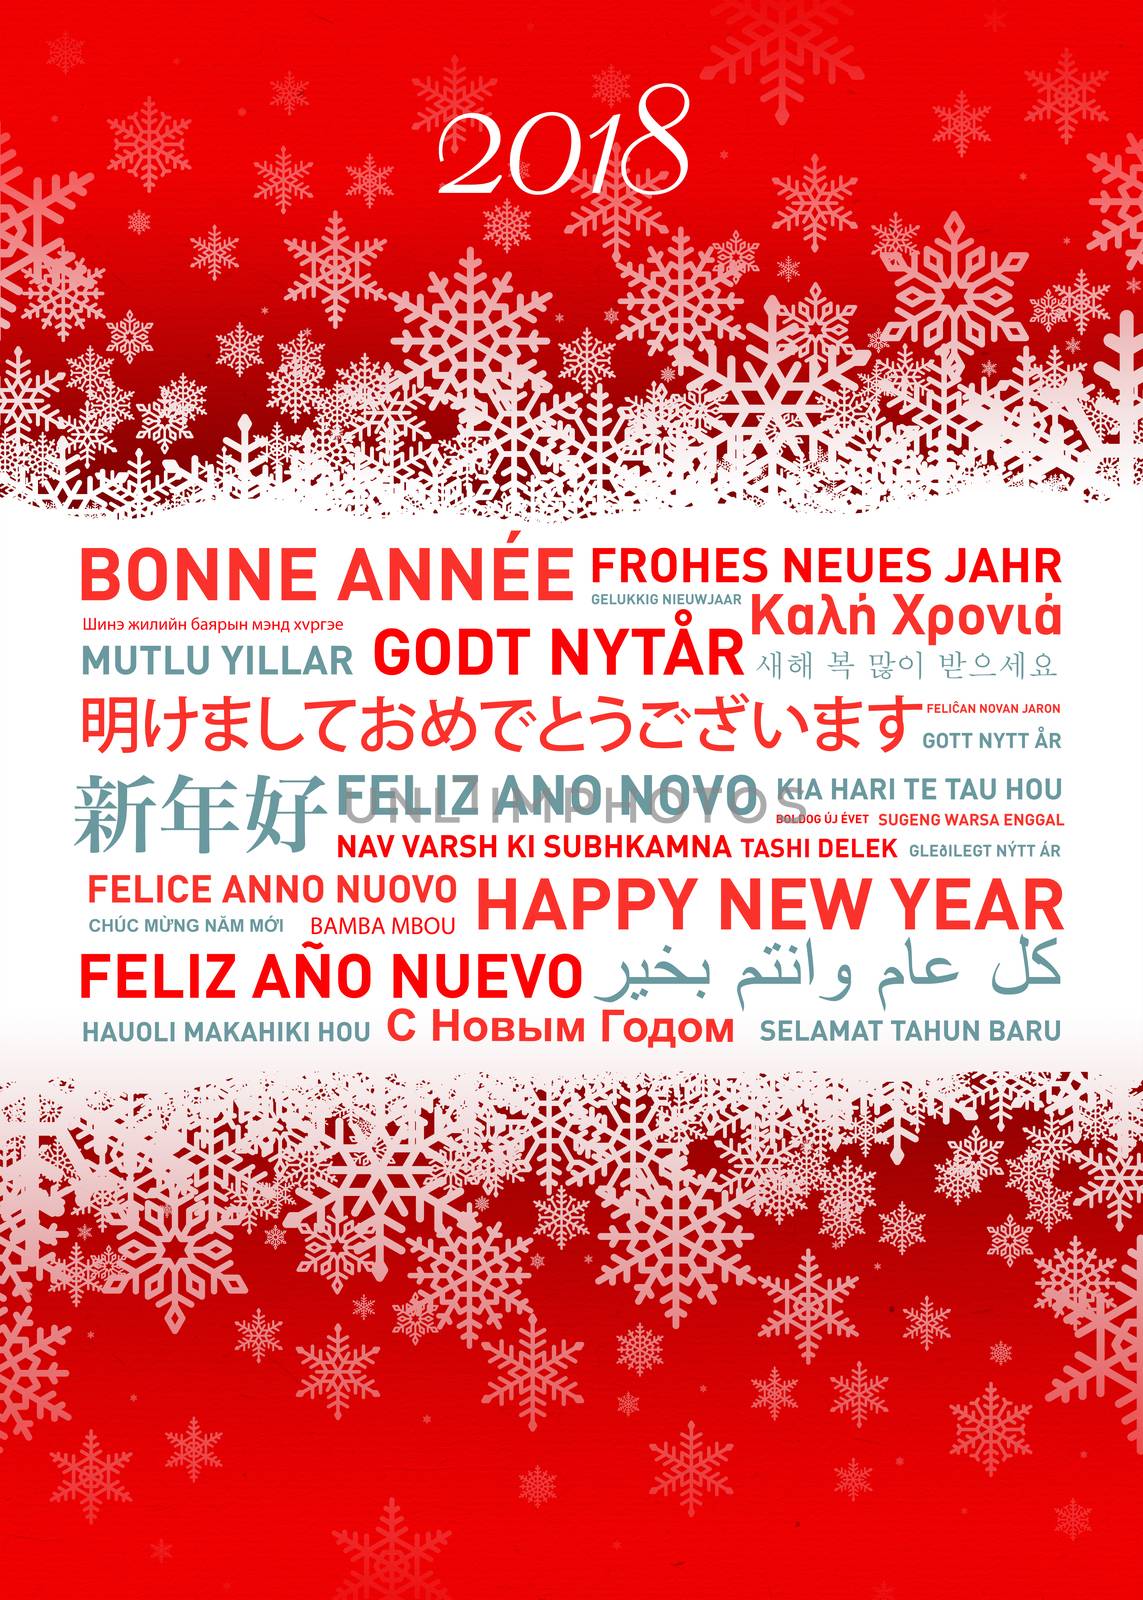 Happy new year card from all the world by daboost